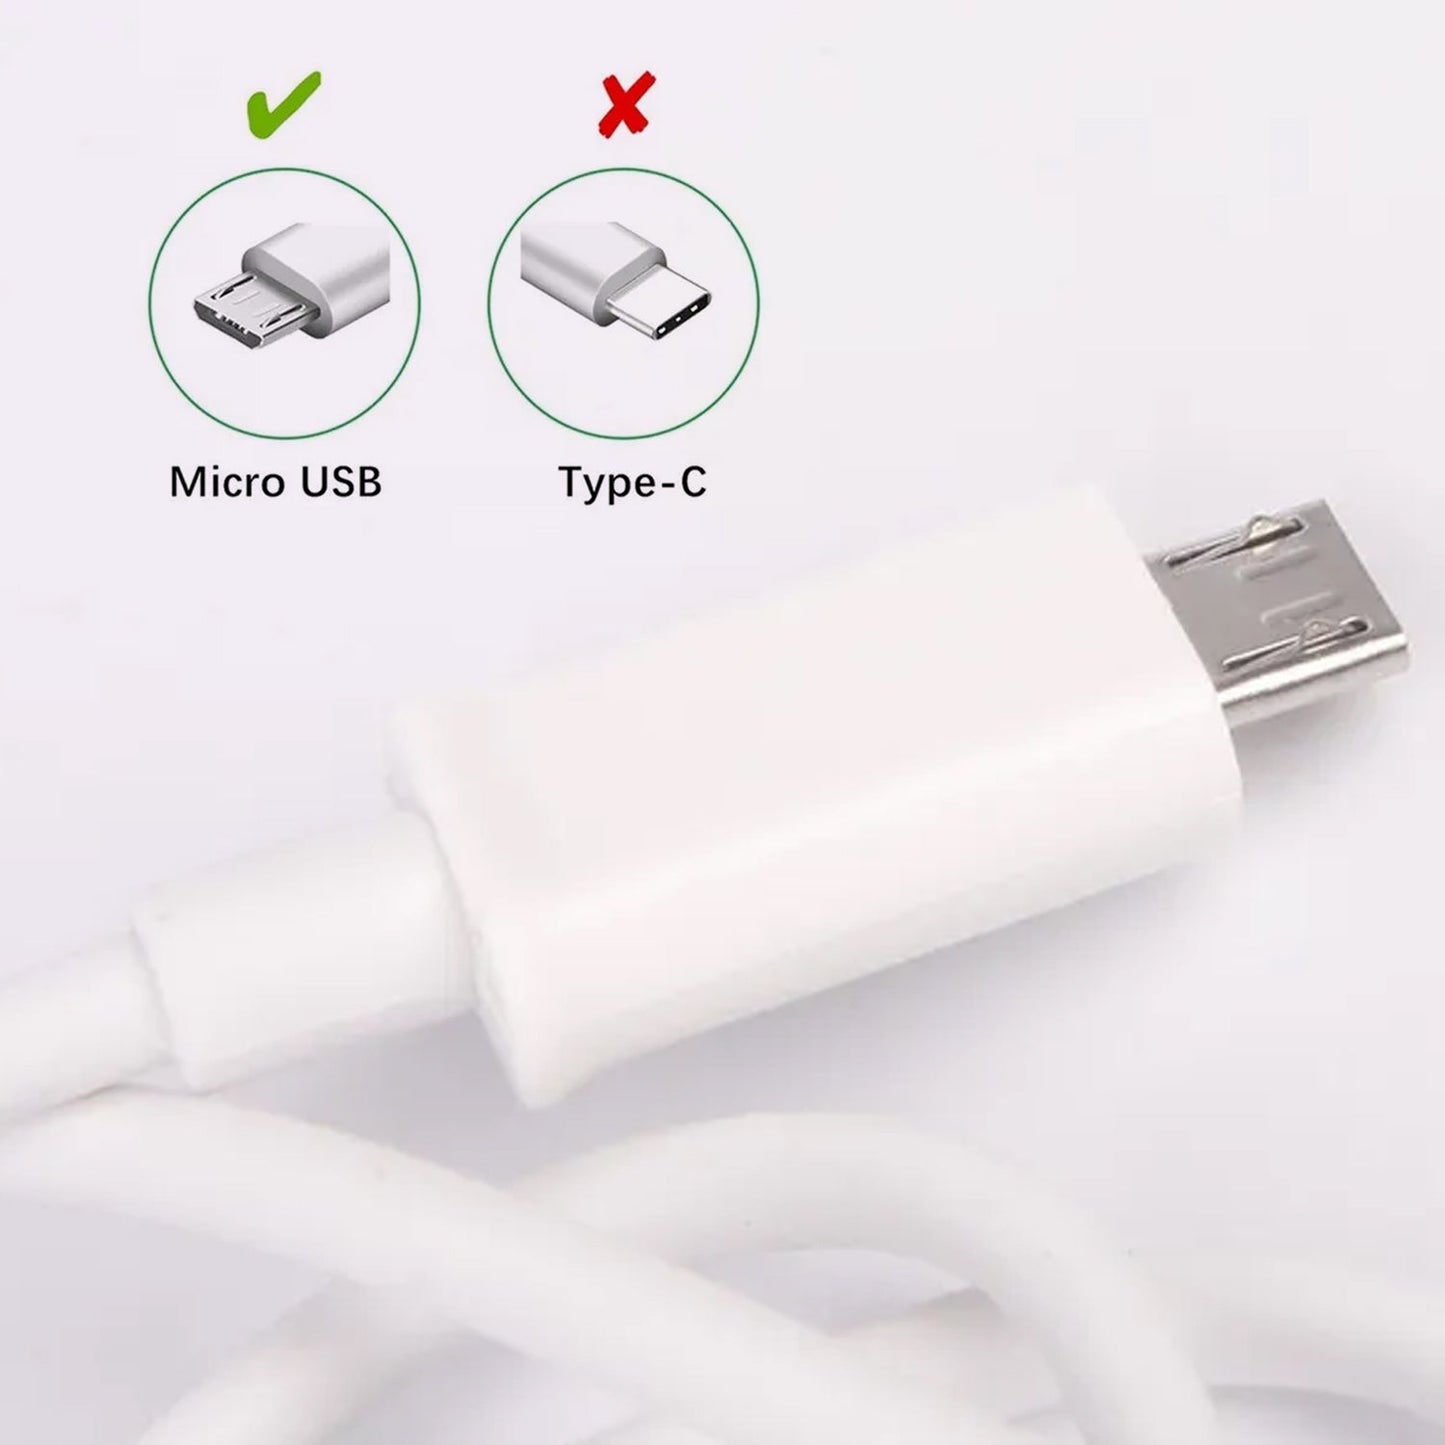 Fast Charging for android & Data Transfer Extra Tough Long Micro Cable for All Compatible Smartphone and Tablets